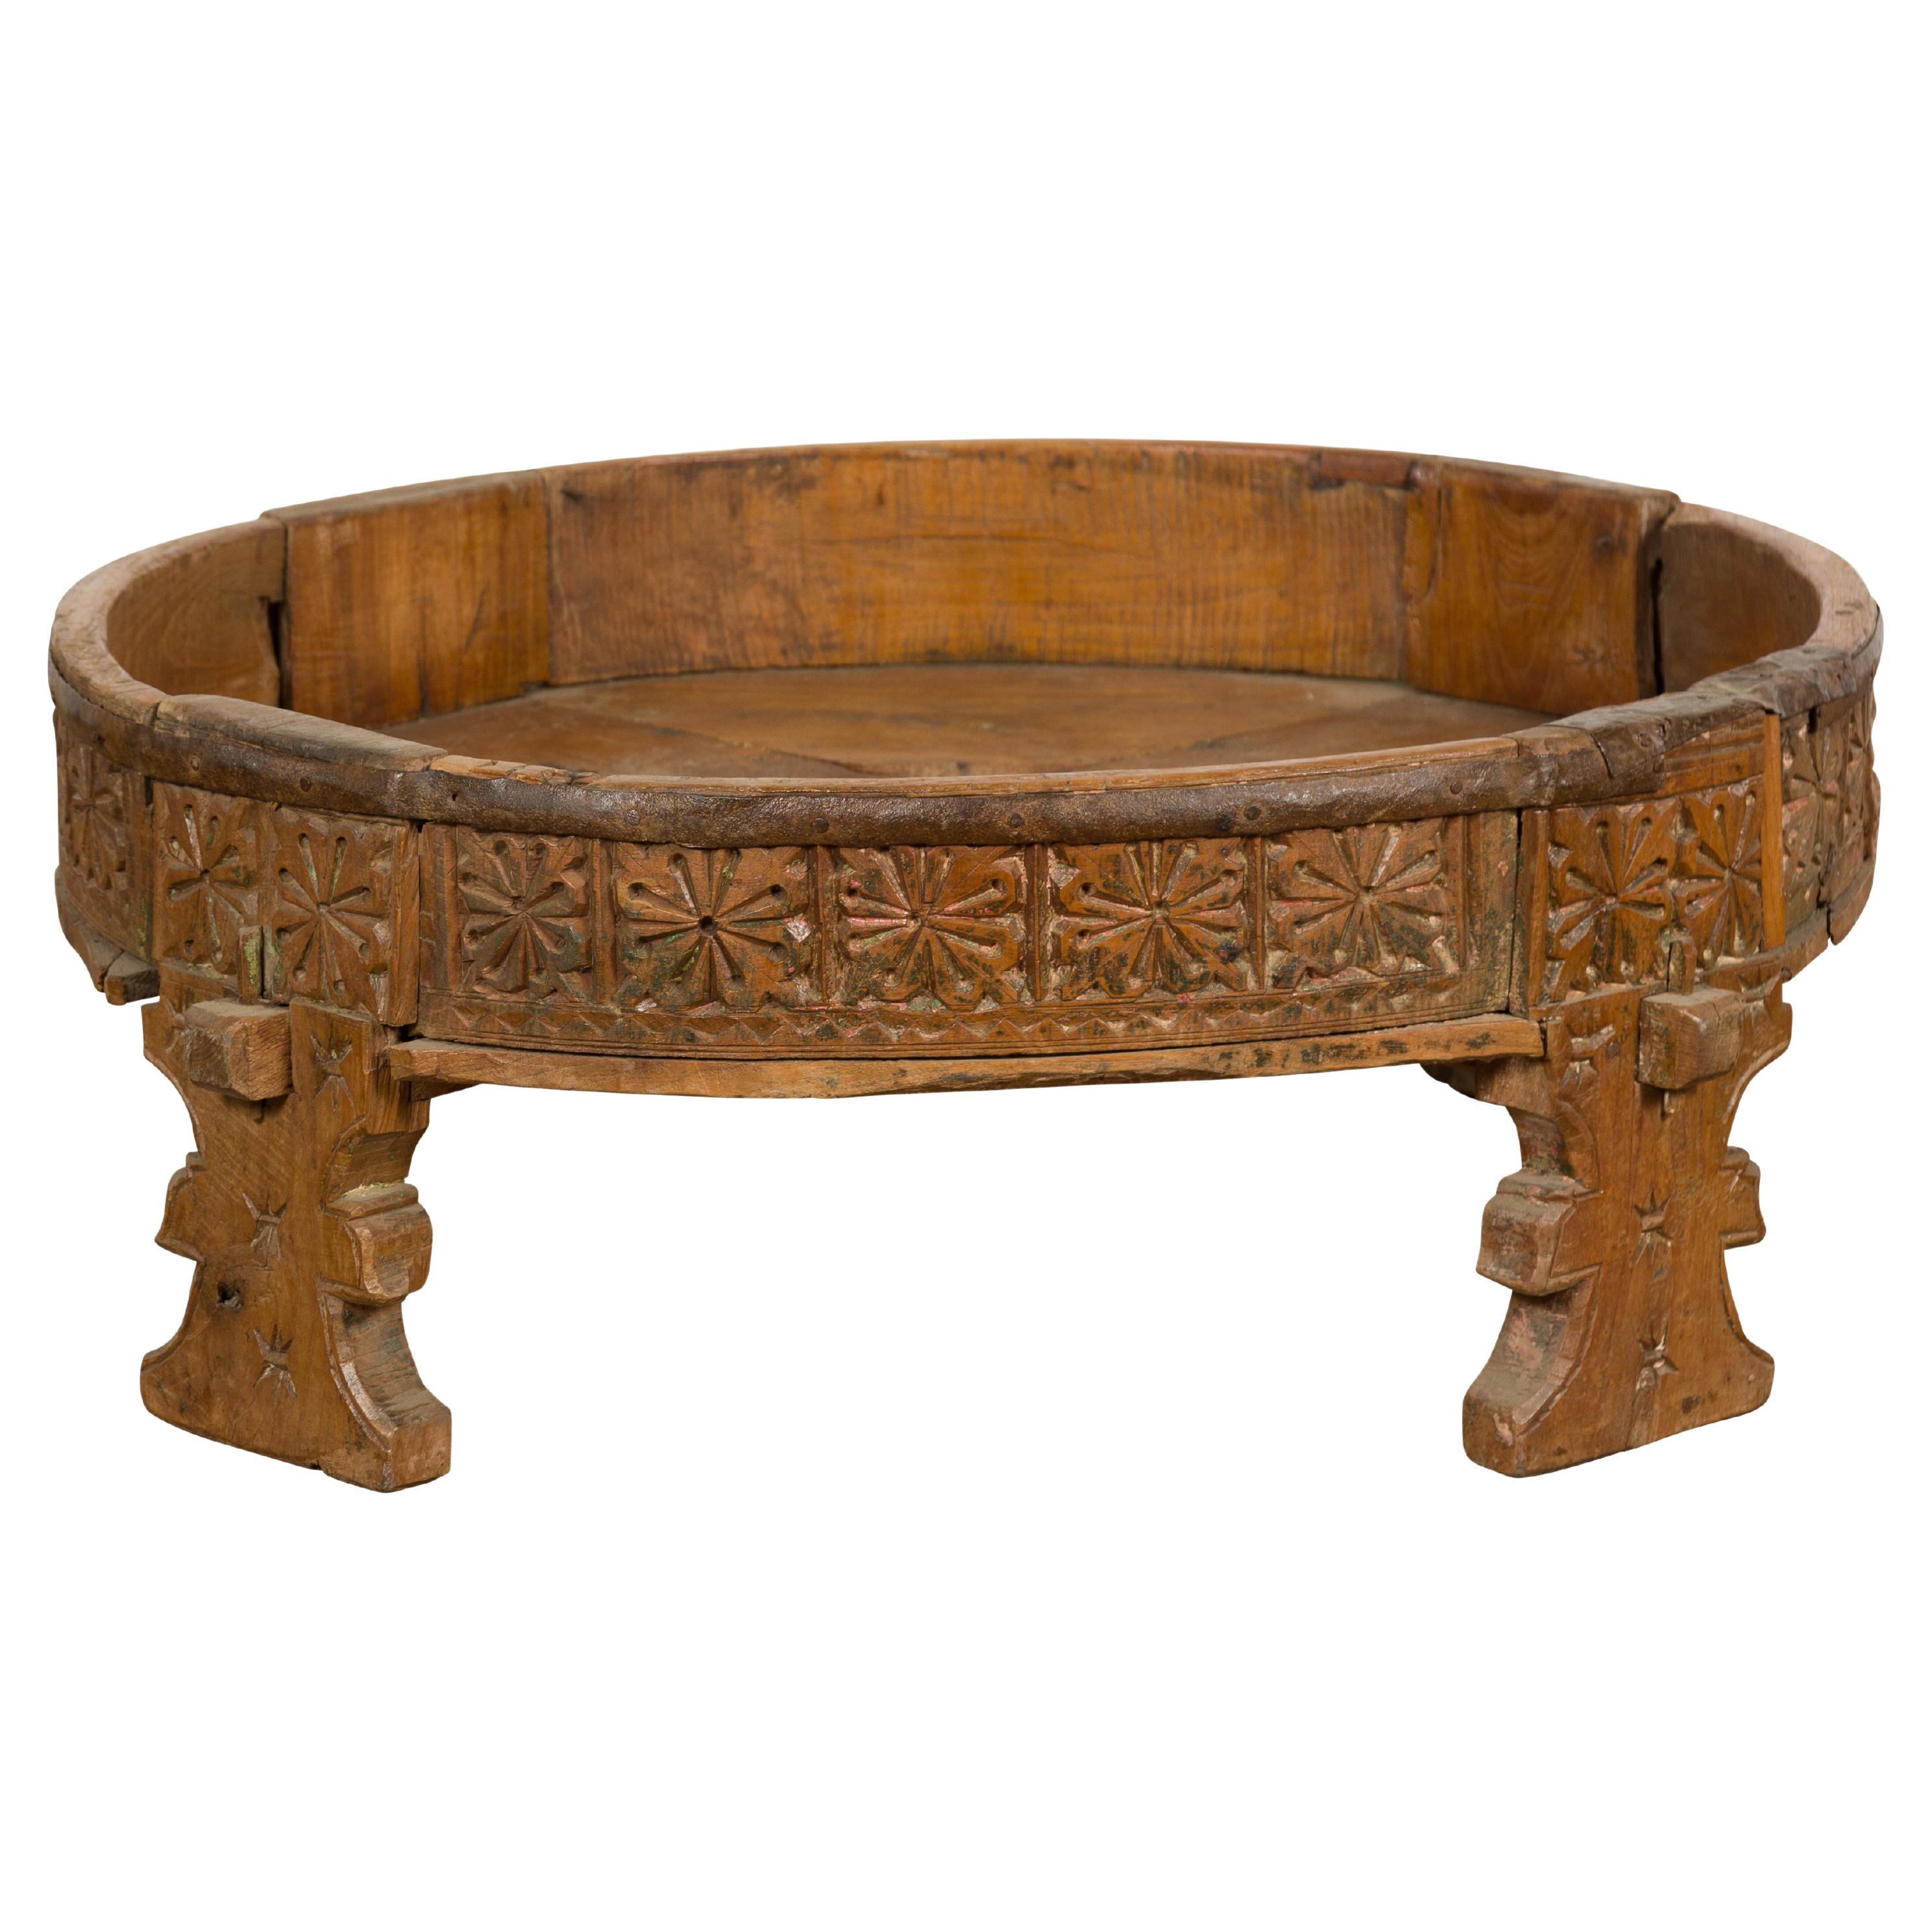 Indian Tribal 1920s Teak Chakki Grinding Table with Geometric Hand-Carved Motifs For Sale